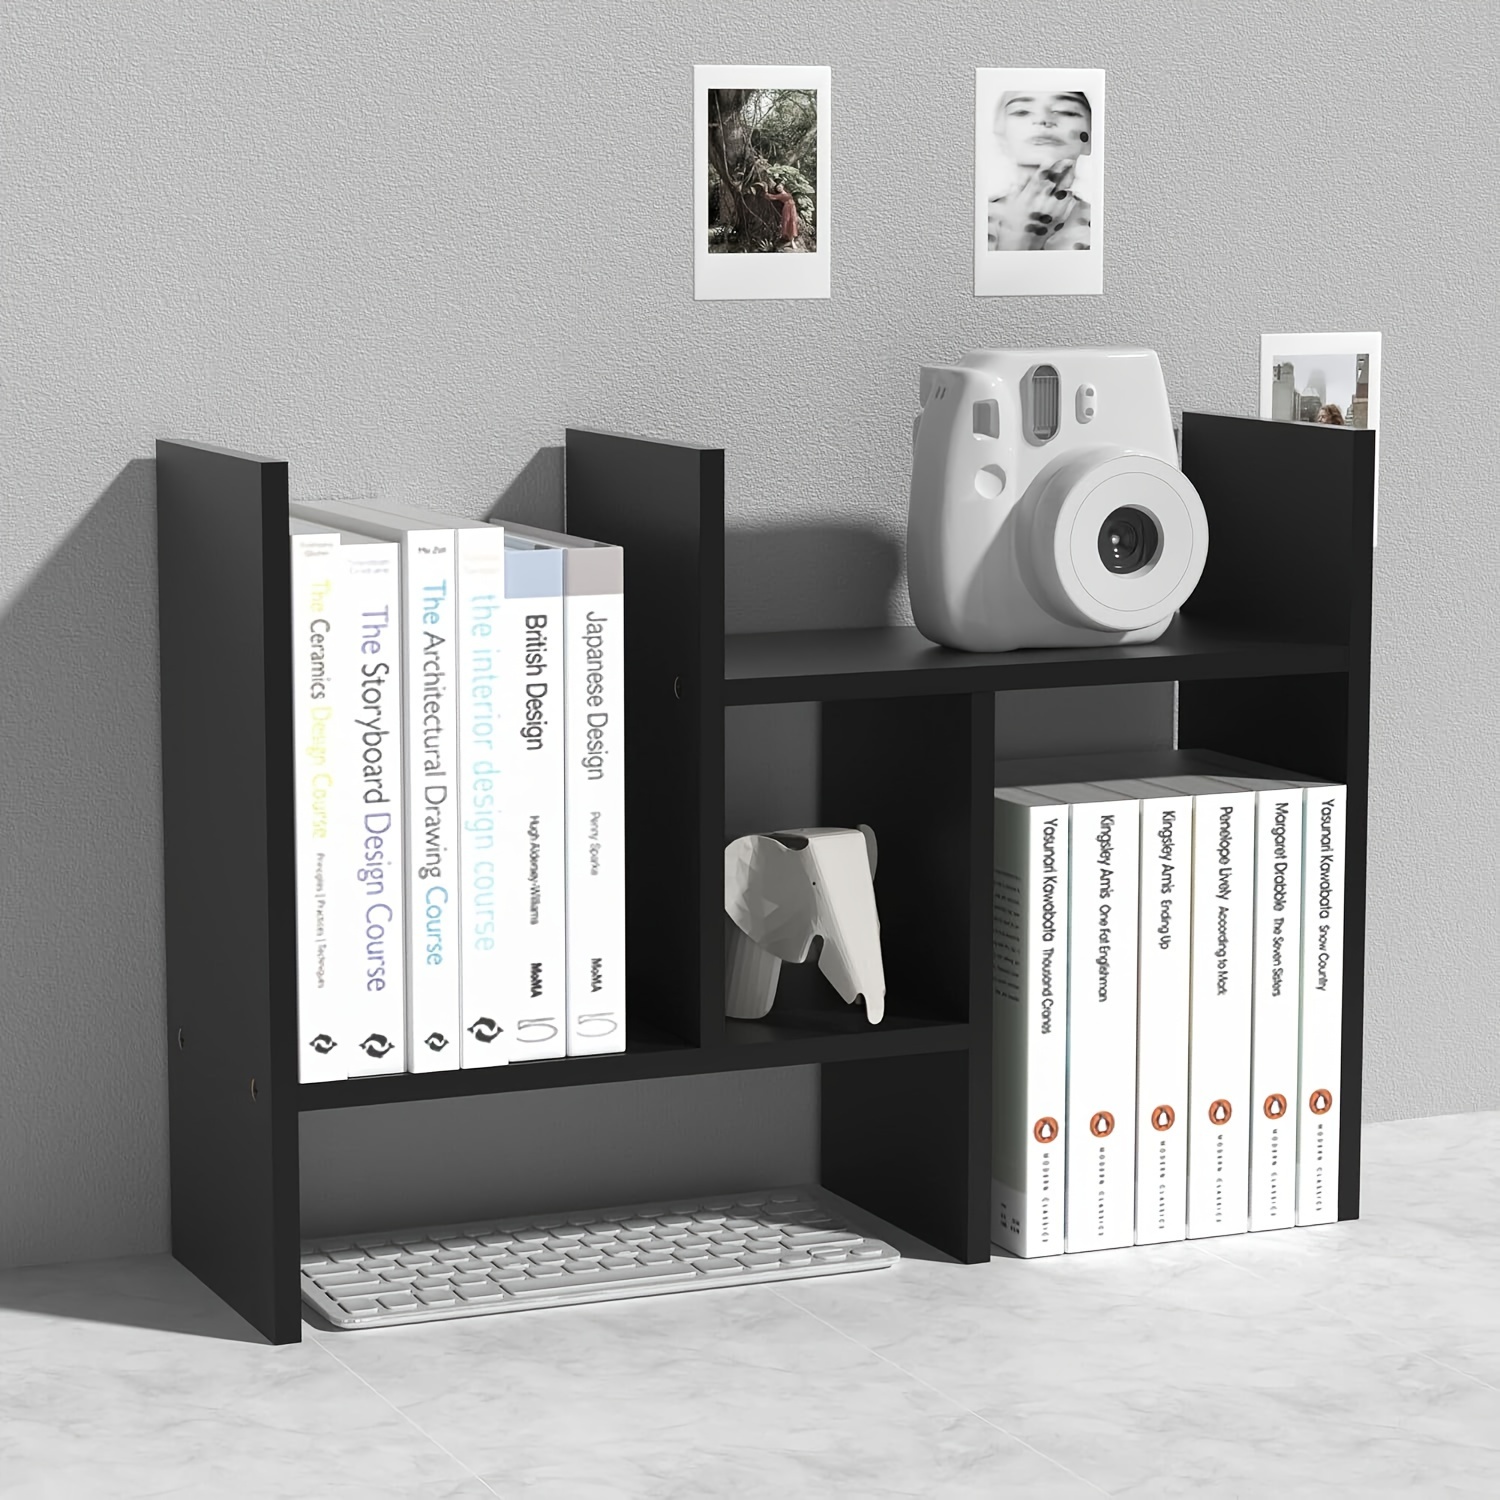 Solid Wood Rotating Bookshelf 360 Degrees Movable Small Bookcase Floor with  Wheels Simple Rack Home Children against the Wall